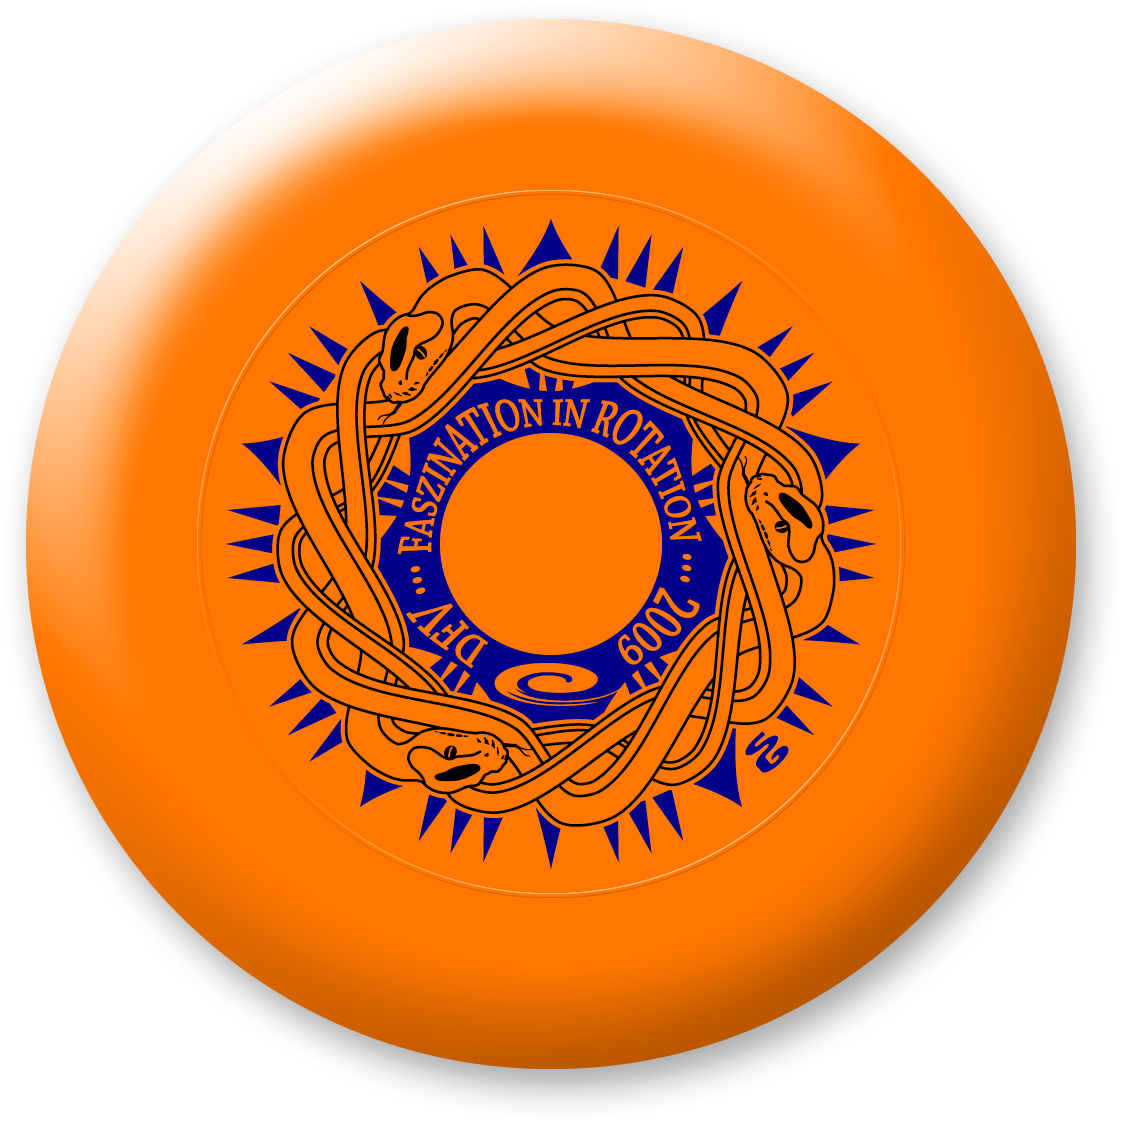 An Orange Frisbee With A Blue Circle And A Blue Circle With A Blue Circle With A Blue Circle With A Blue Circle With A Blue Circle With A Blue Circle With A Blue Circle With